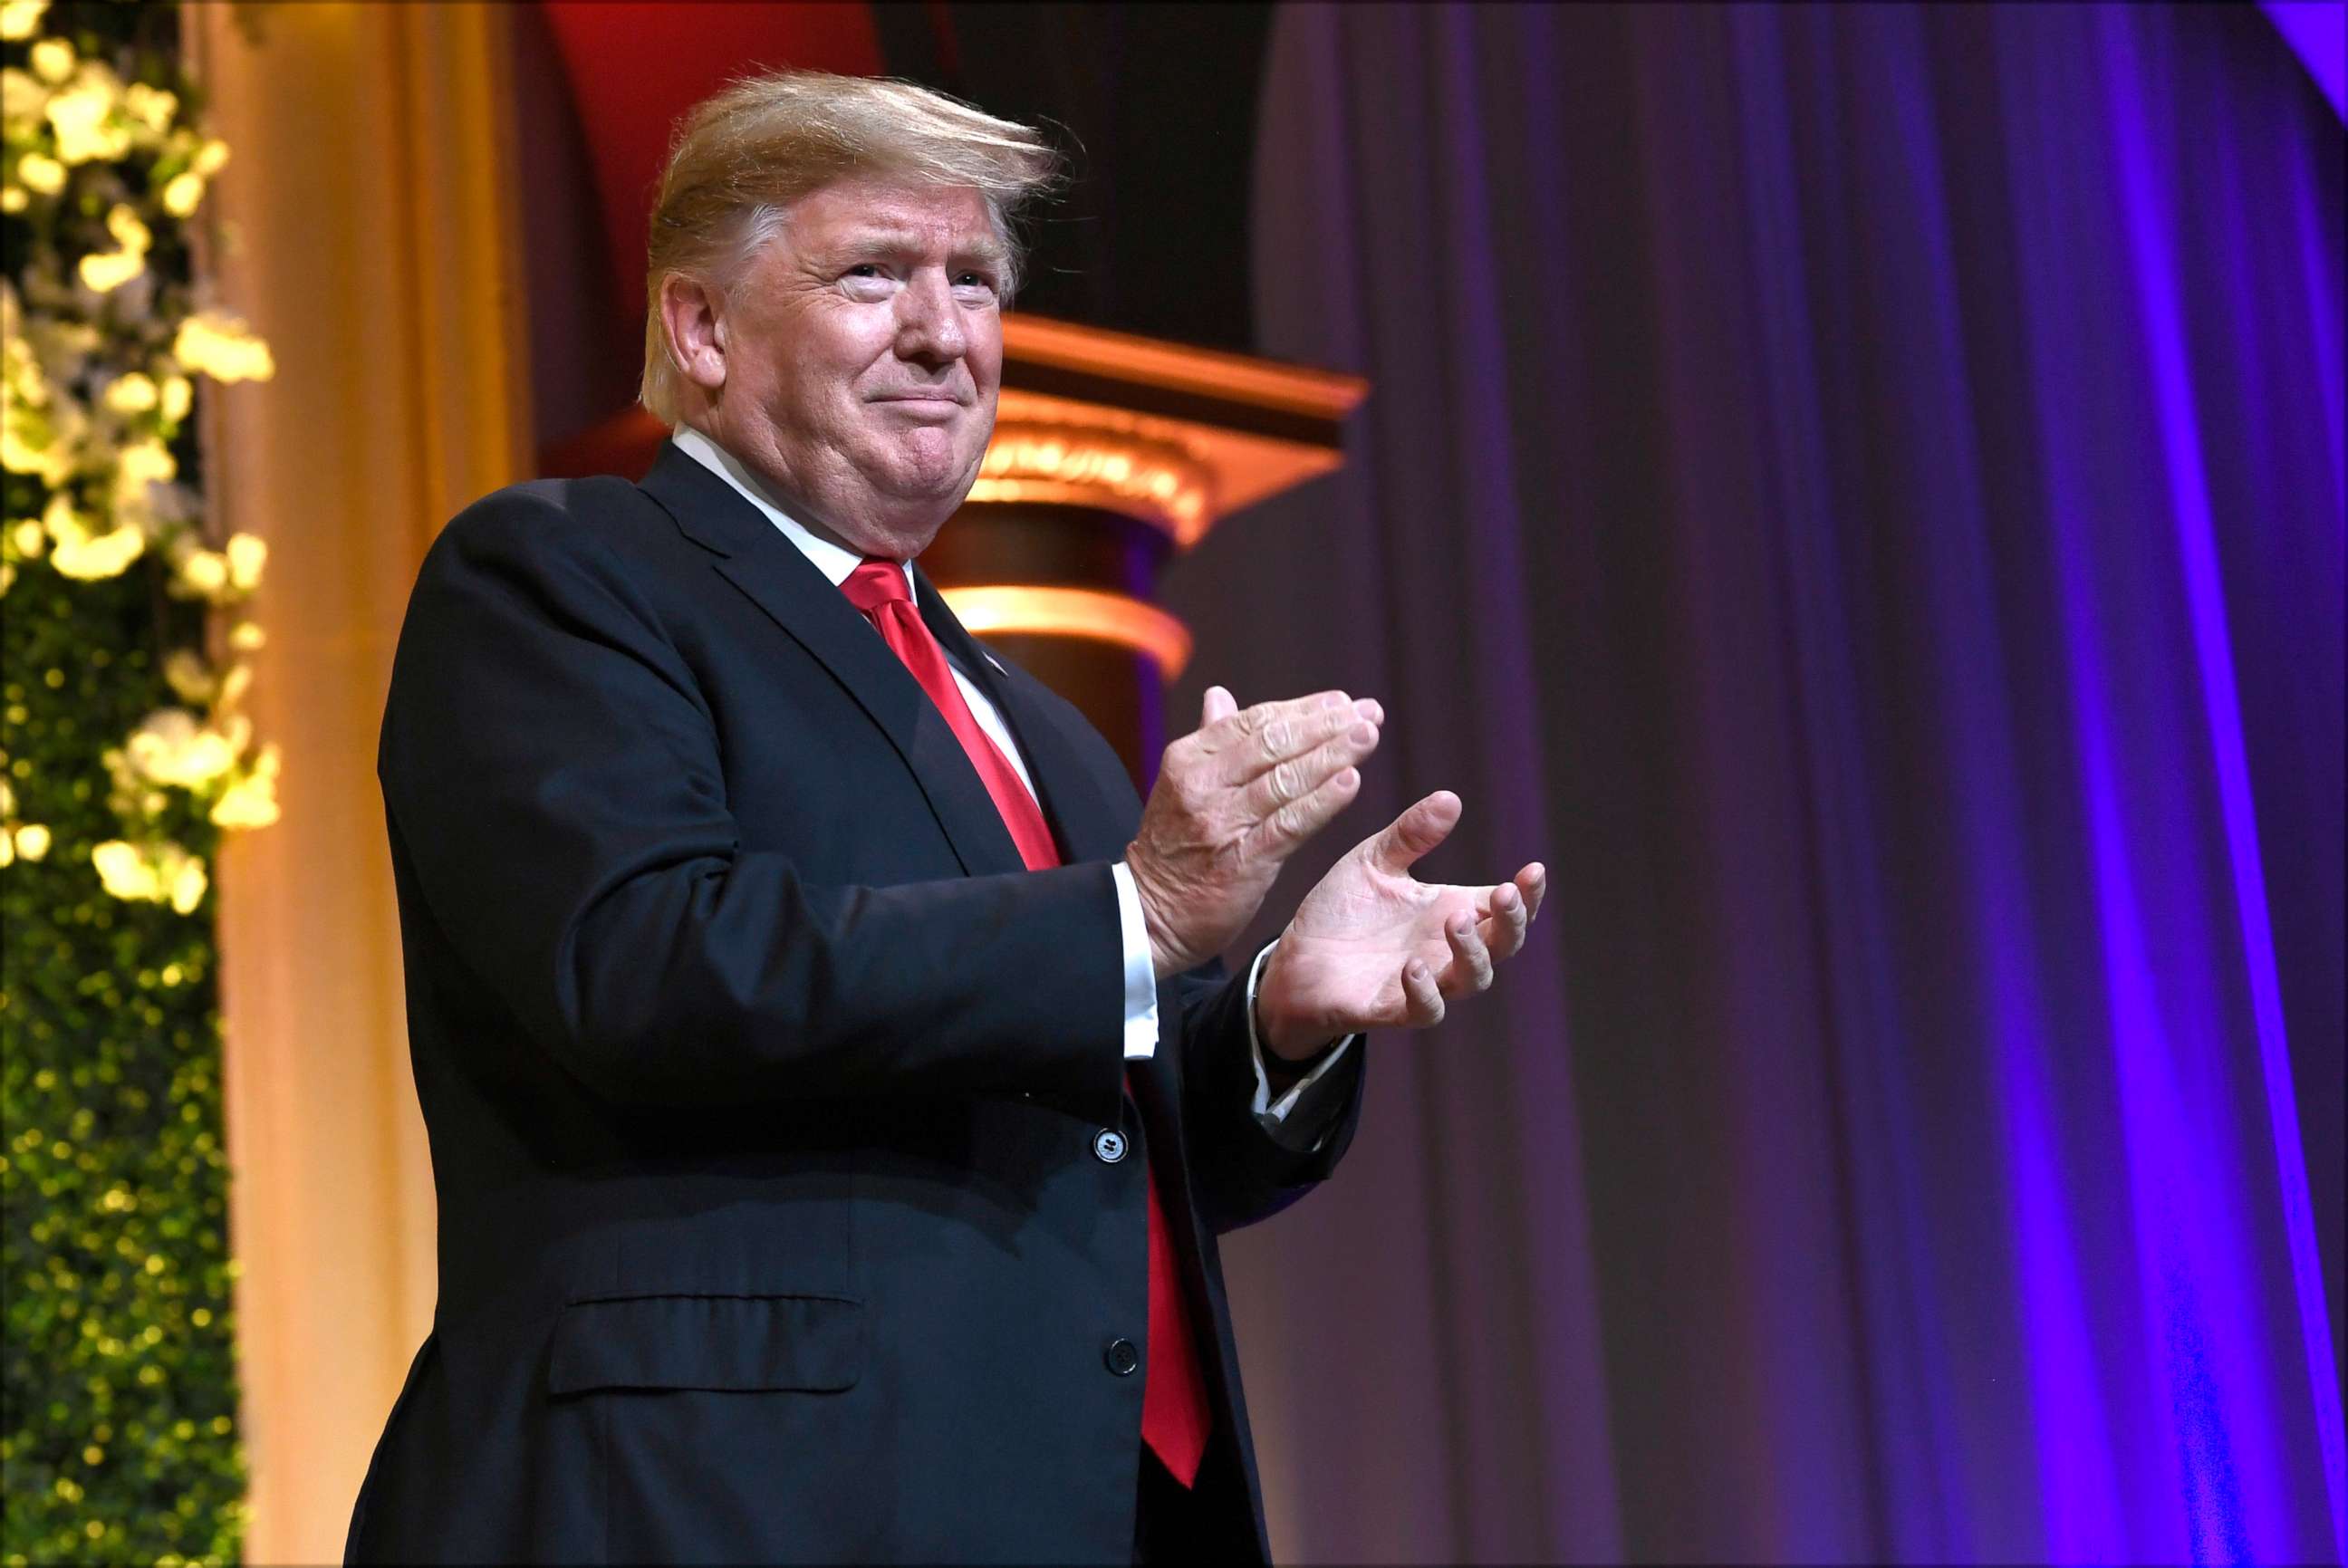 PHOTO: President Donald Trump arrives to speak at the National Republican Congressional Committee's annual spring dinner in Washington, April 2, 2019.